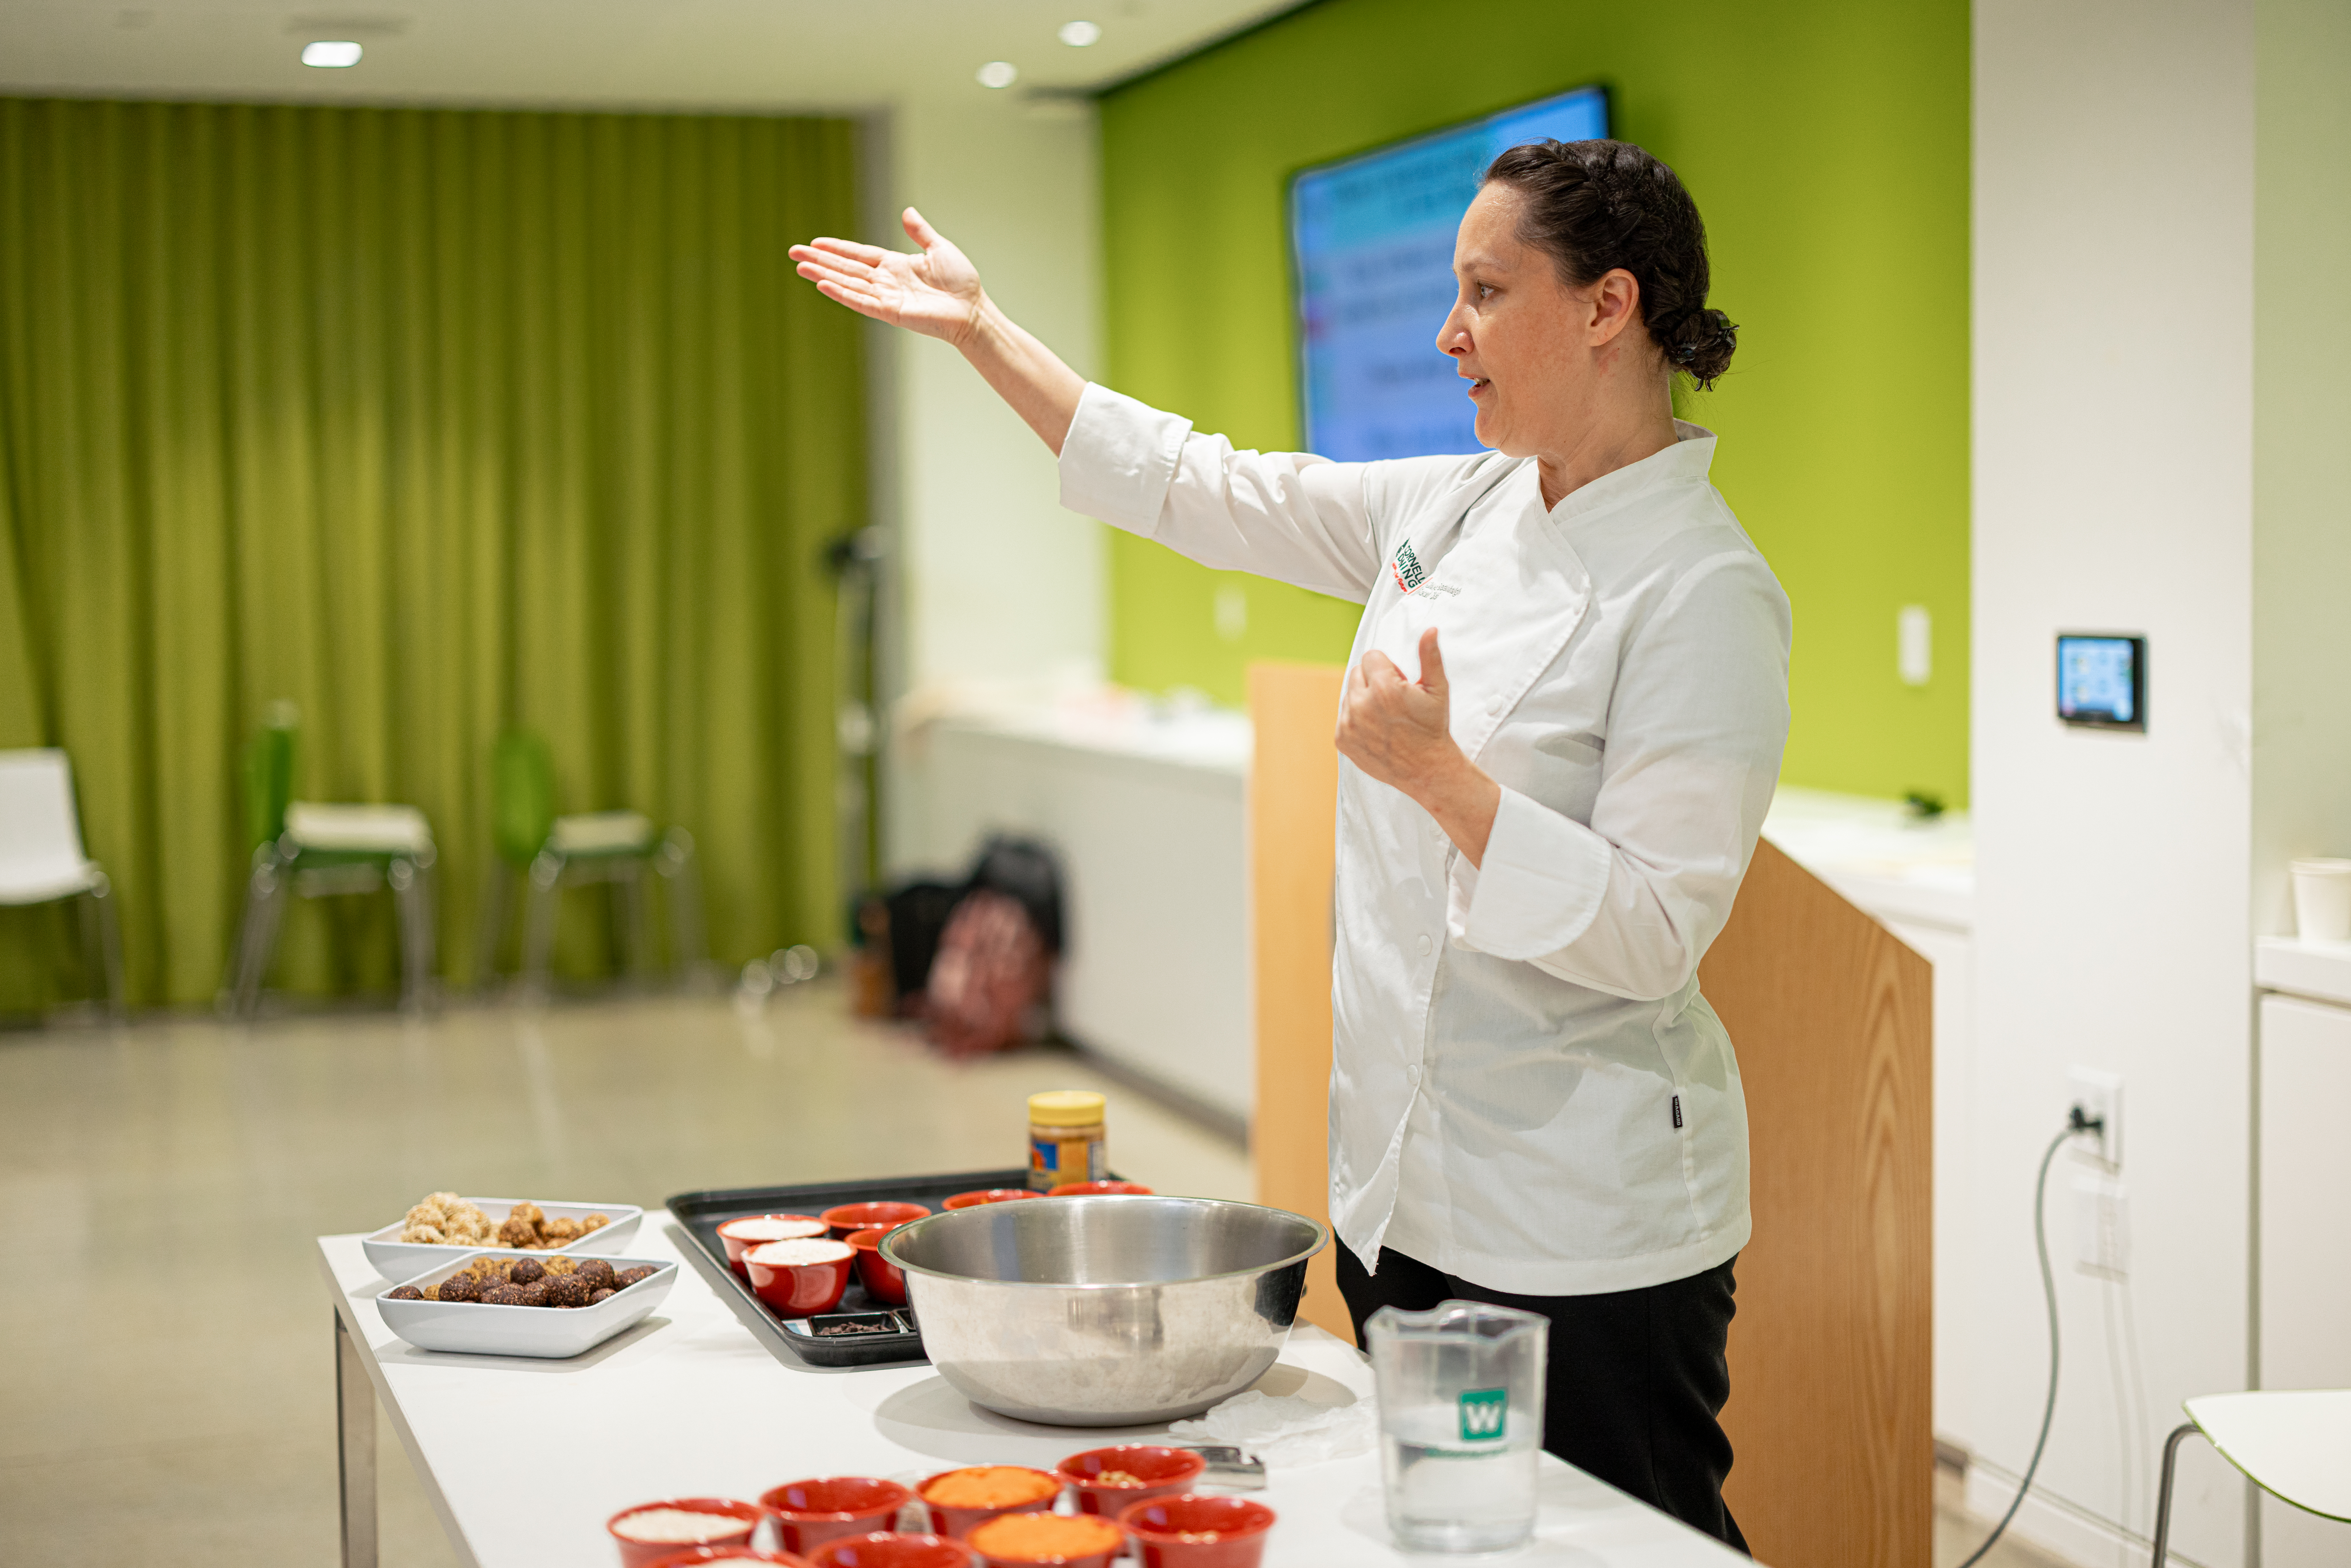 Senior chef Chloe Greenhalgh teaches a cooking class at the College of Veterinary Medicine.